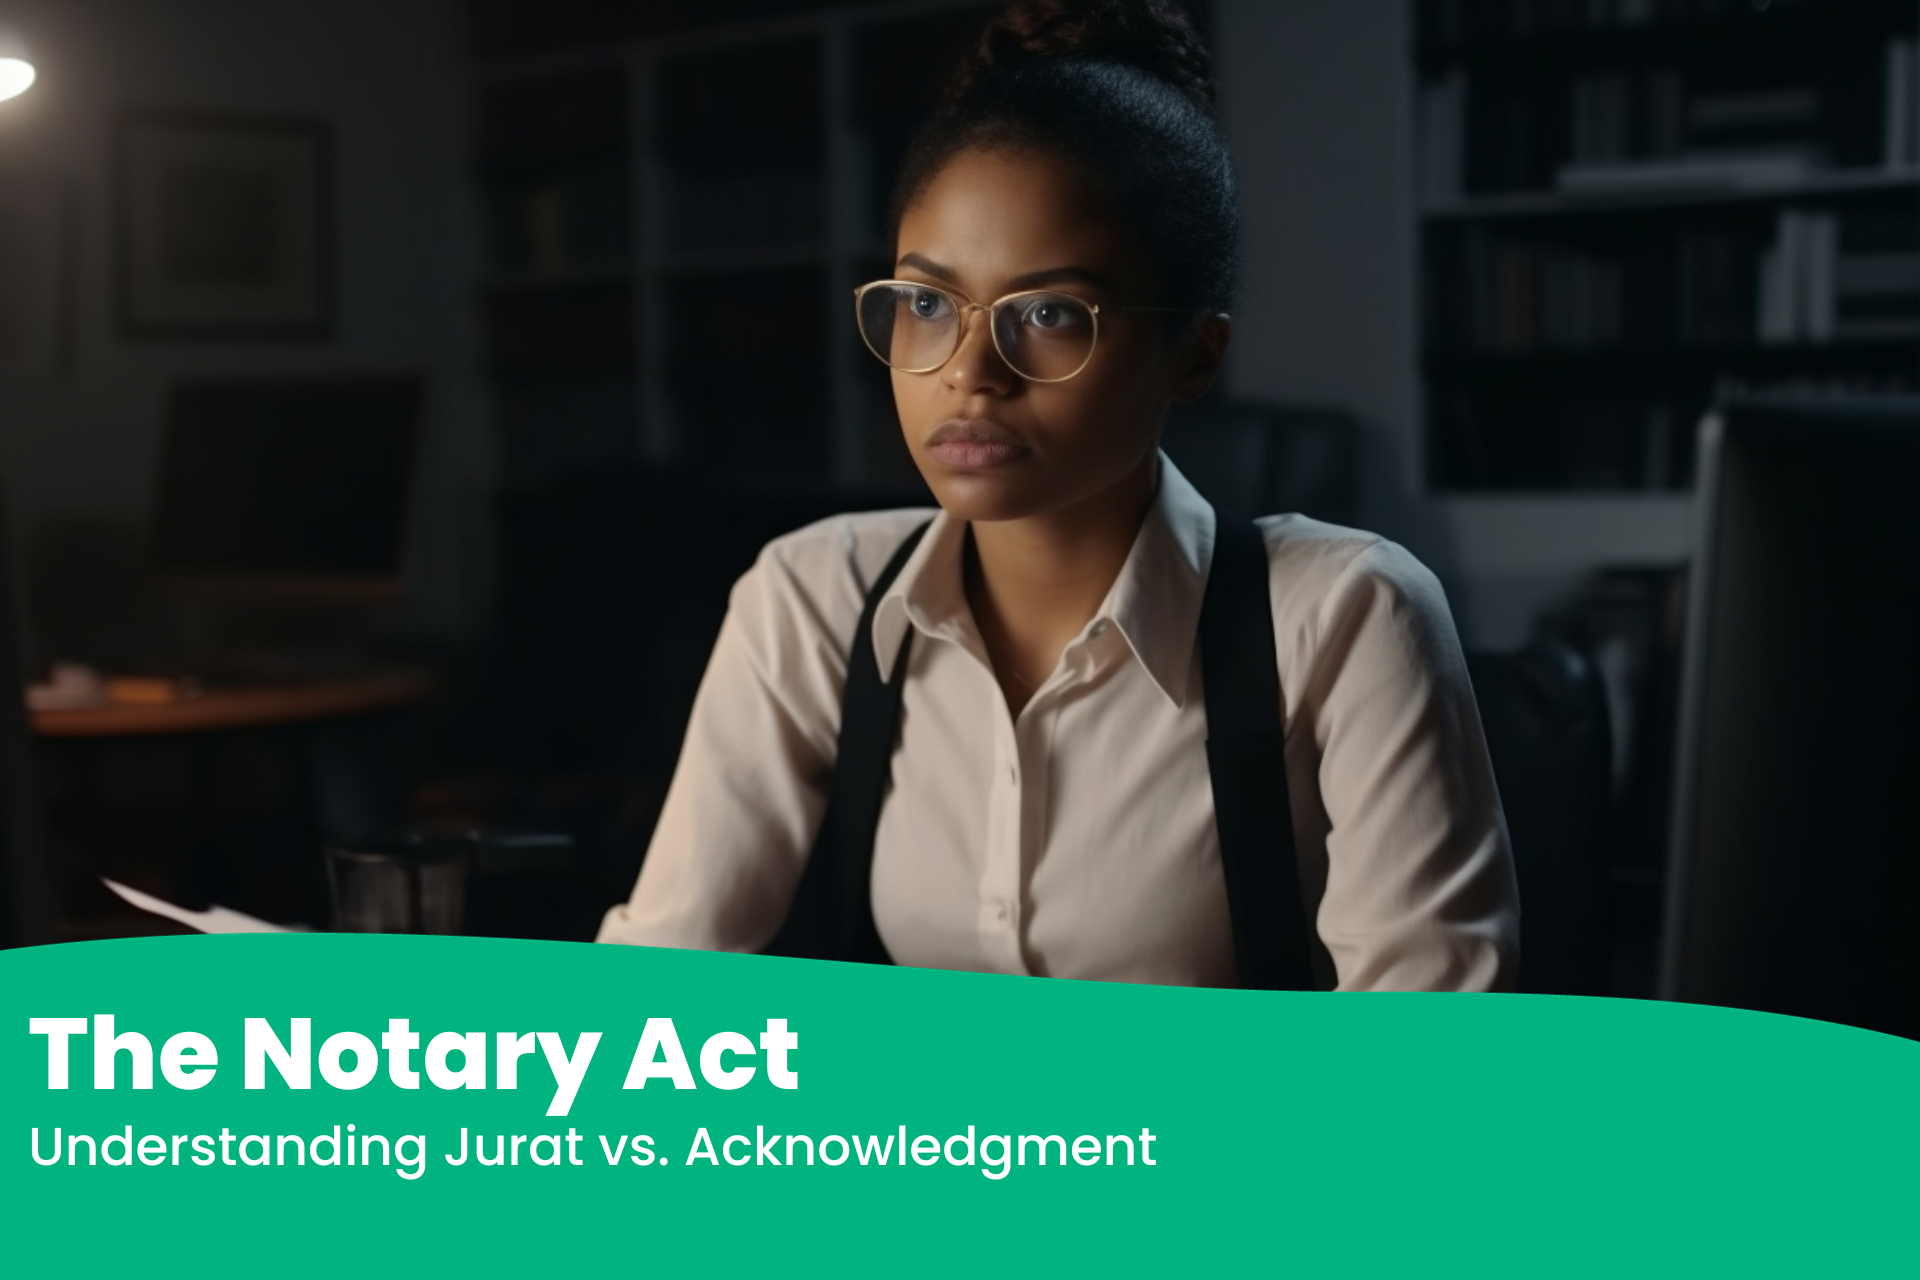 Las Vegas Notary Featured Image for The Notary Act post